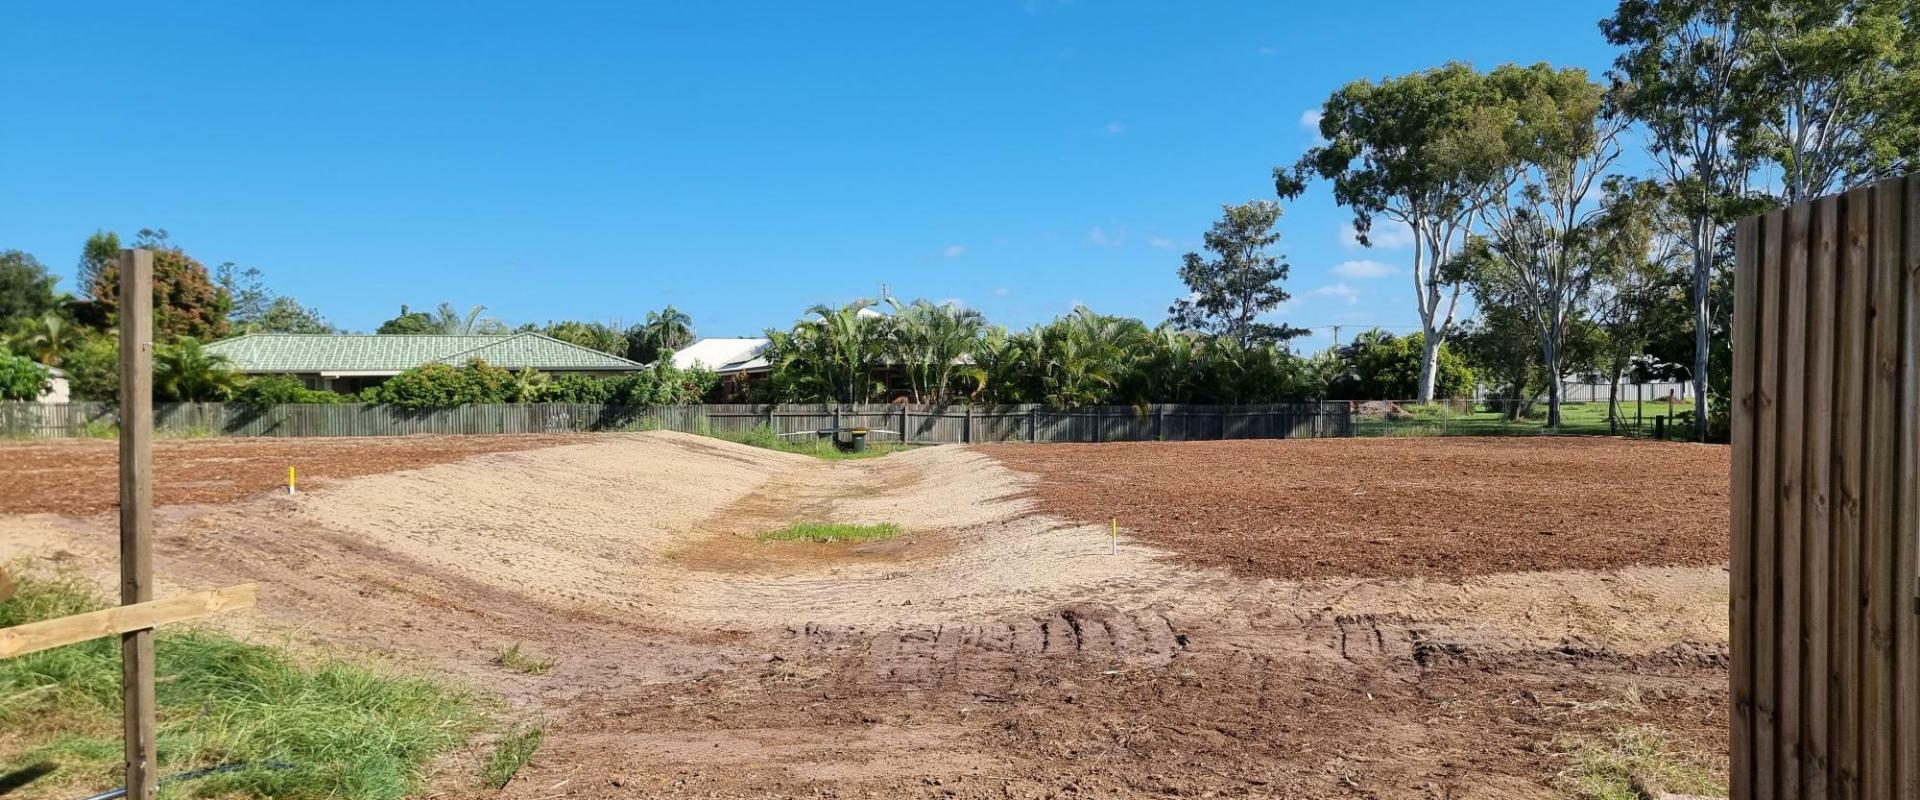 1410 SQM OF PRIME RESIDENTIAL LAND LOCATED IN A QUIET SETTING POSITION and WITHIN WALKING DISTANCE TO THE BEACH and COASTAL WATERS OF THE BAY.